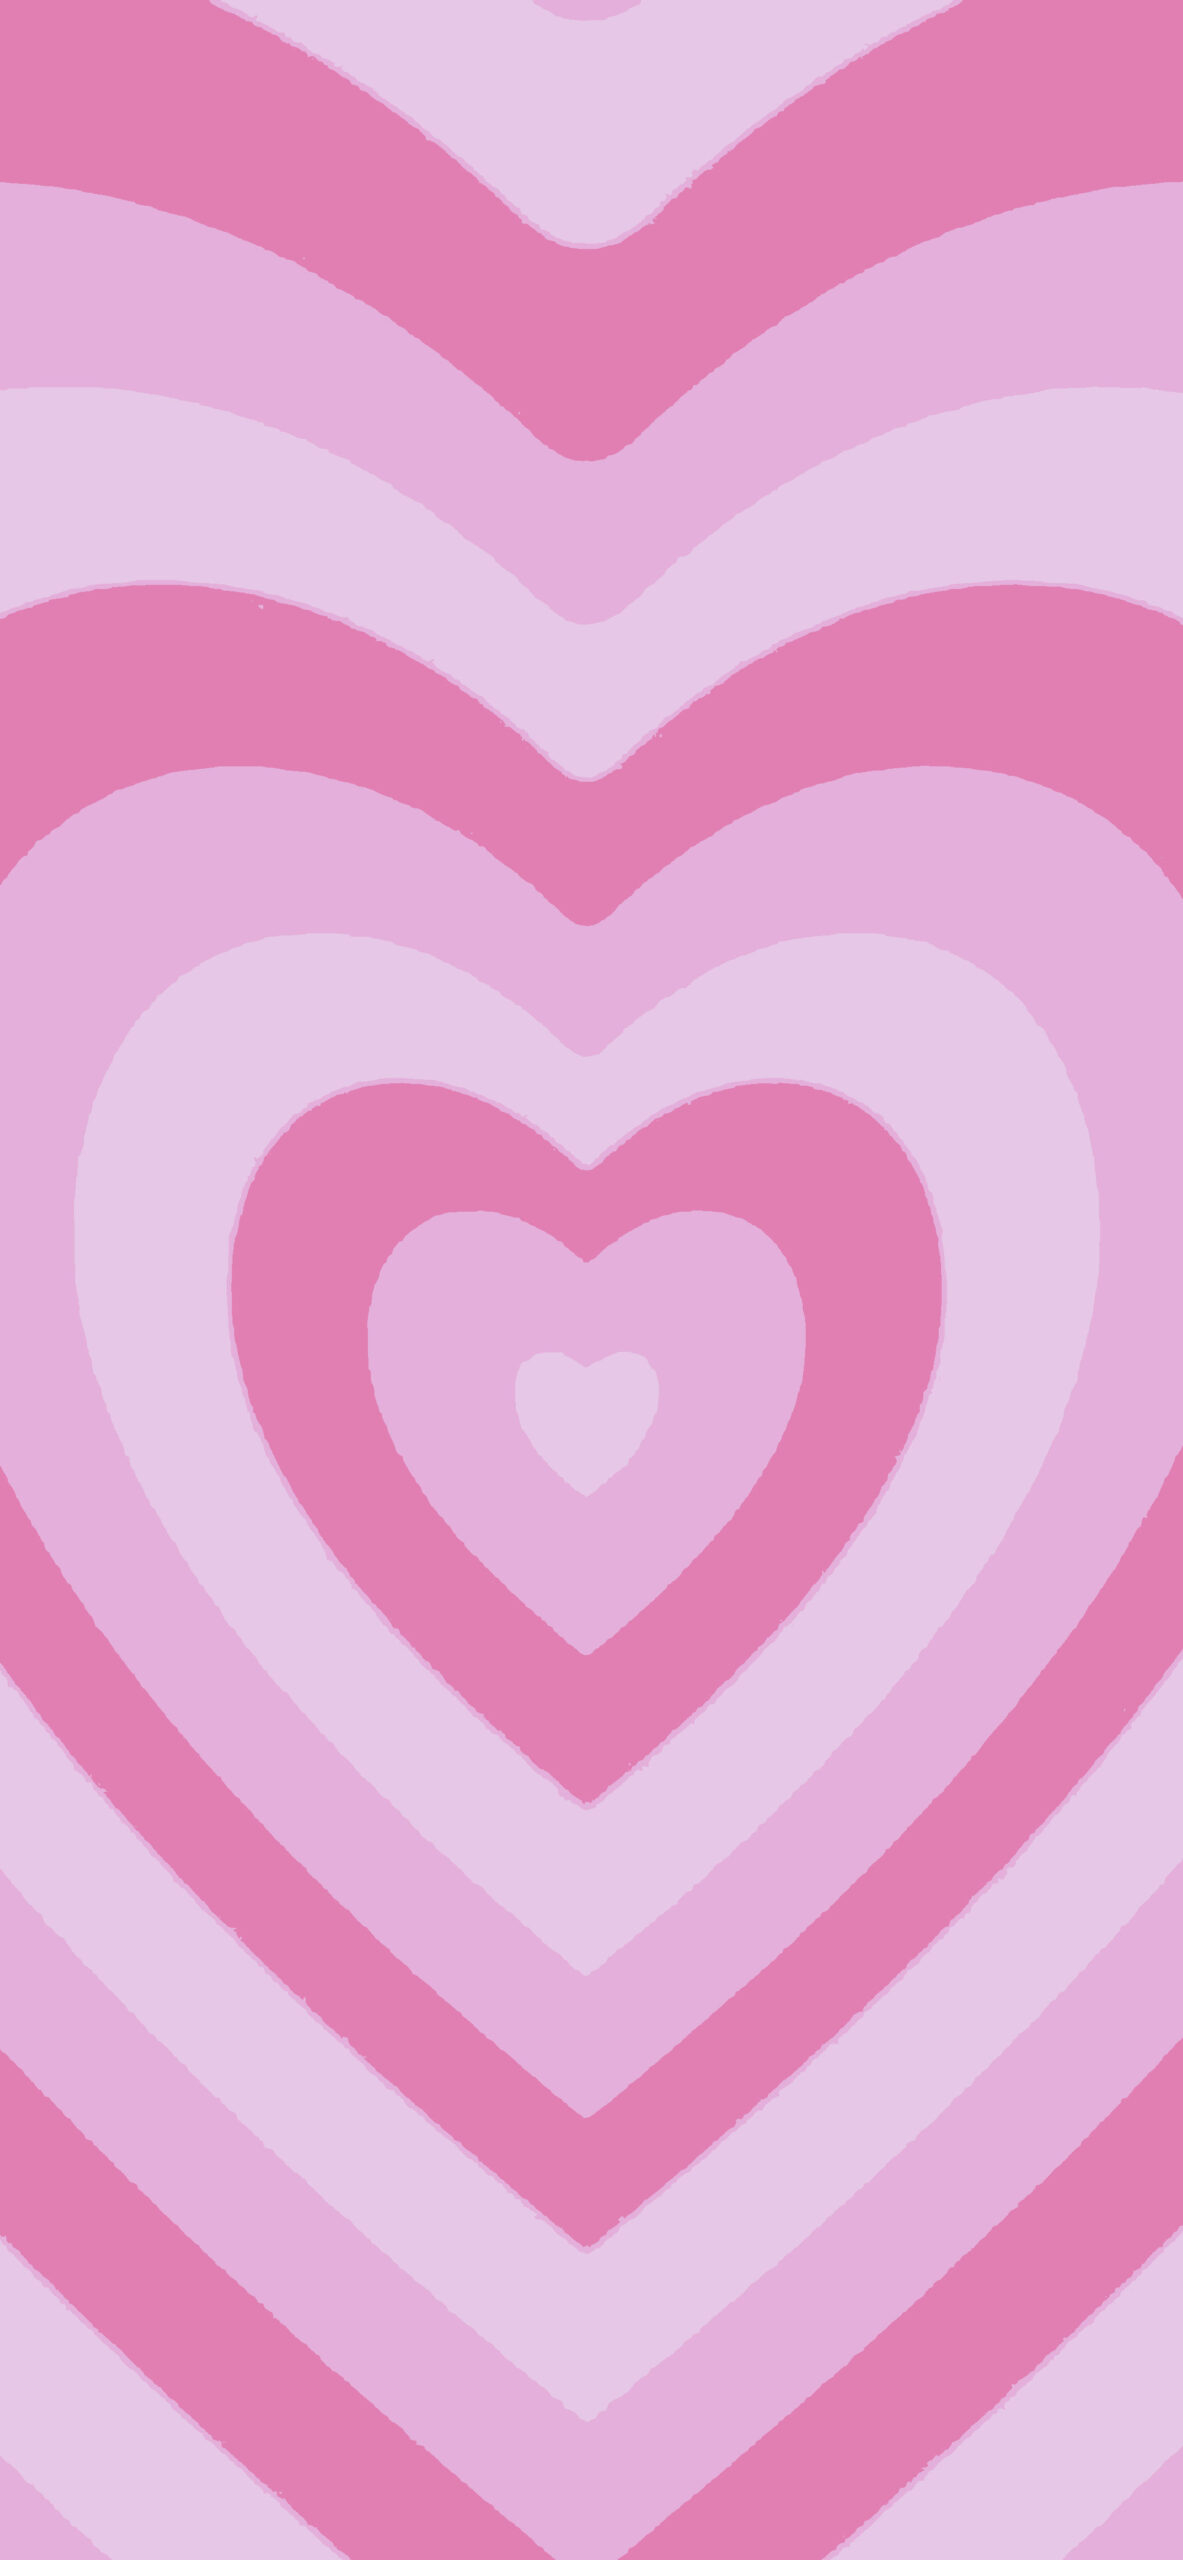 1183x2560 Pink Heart Wallpapers Light Pink Aesthetic Wallpaper iPhone \u0026 Android